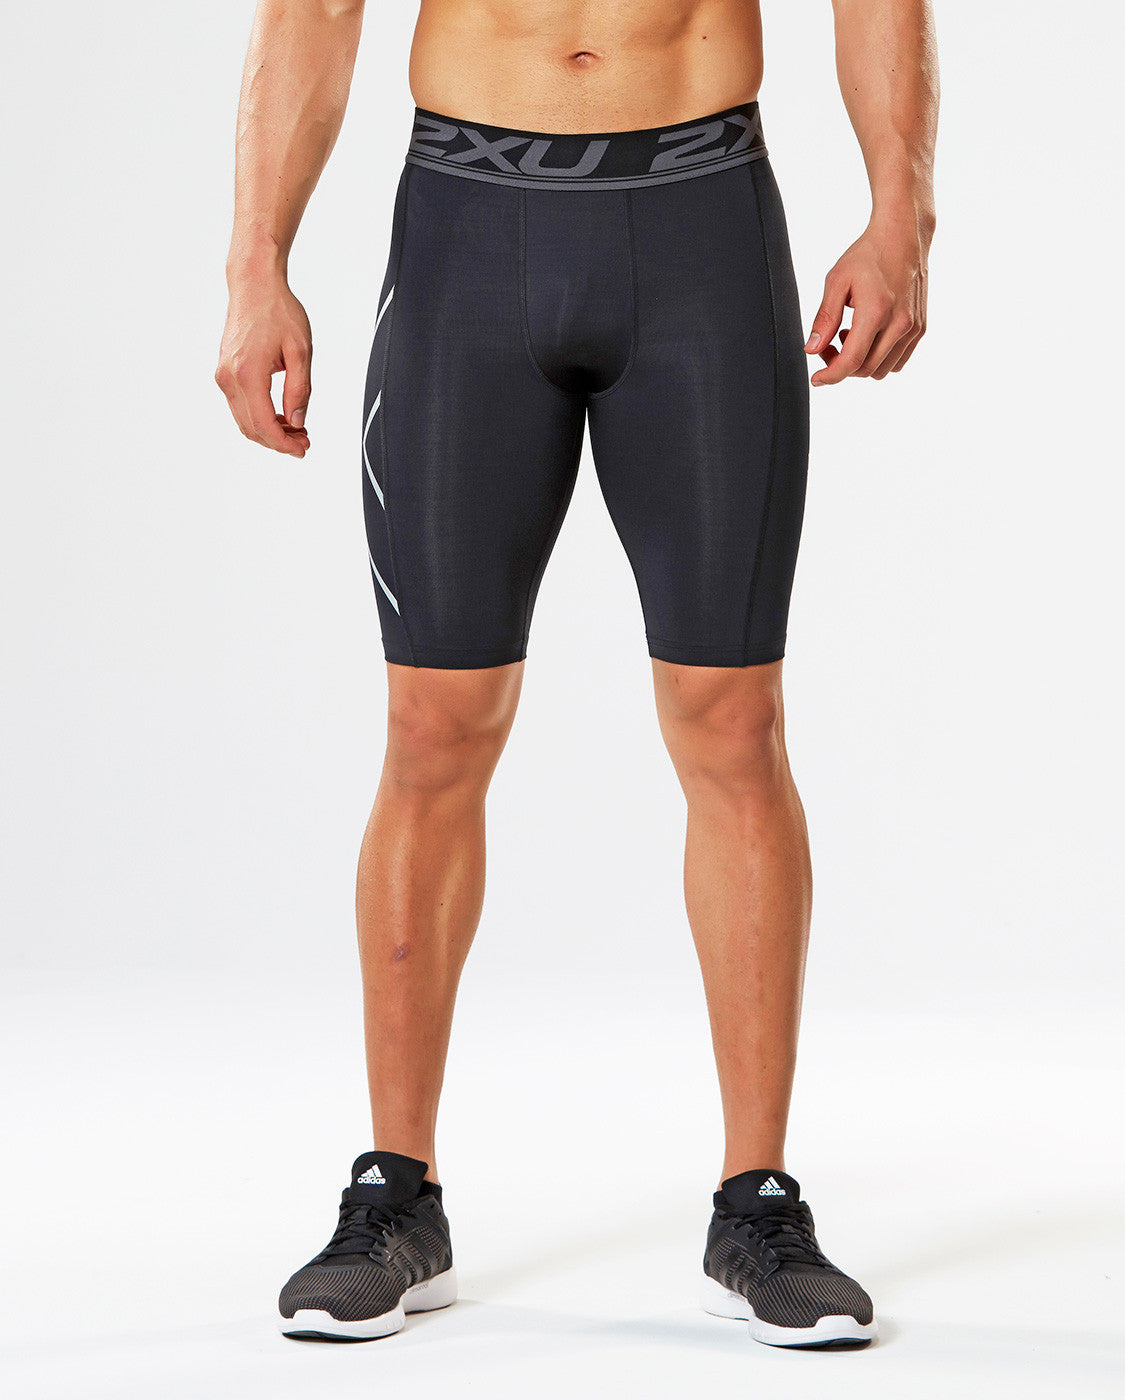 2XU Men's Force Light Speed Compression Shorts